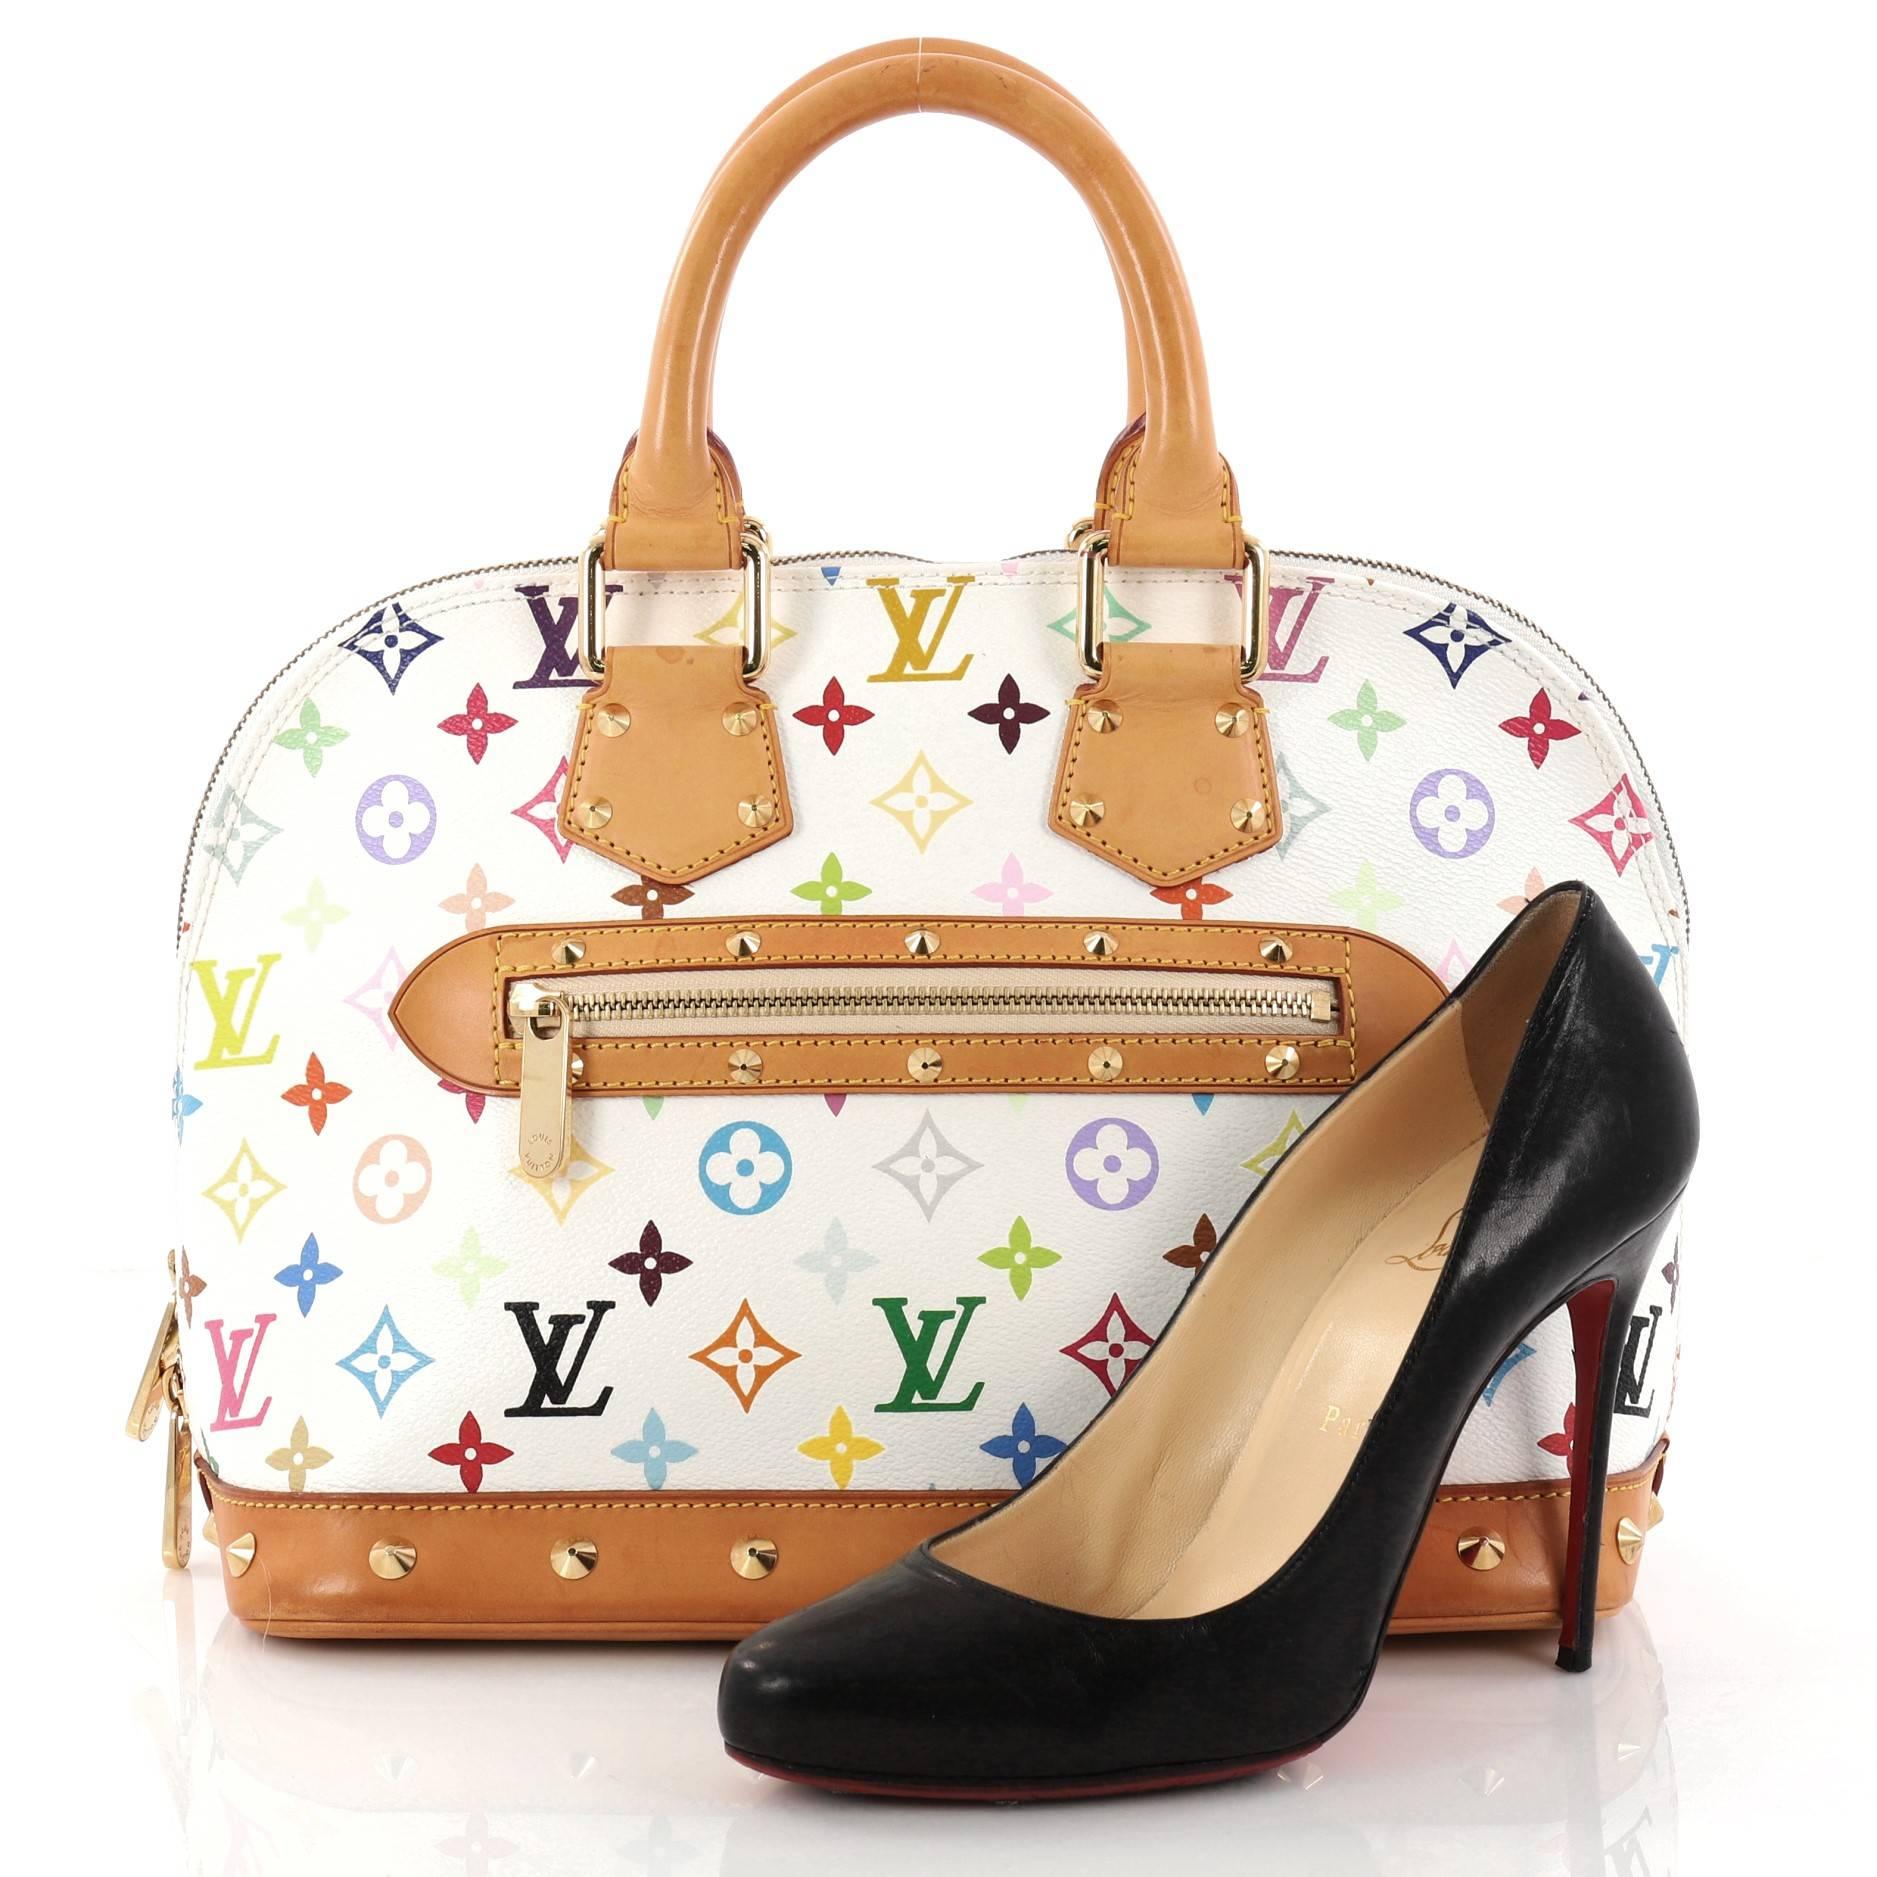 This authentic Louis Vuitton Alma Handbag Monogram Multicolor PM is a versatile structured bag that complements both dressy and casual looks, perfect for the modern woman. Designed in Takashi Murakami's famous white monogram multicolor coated